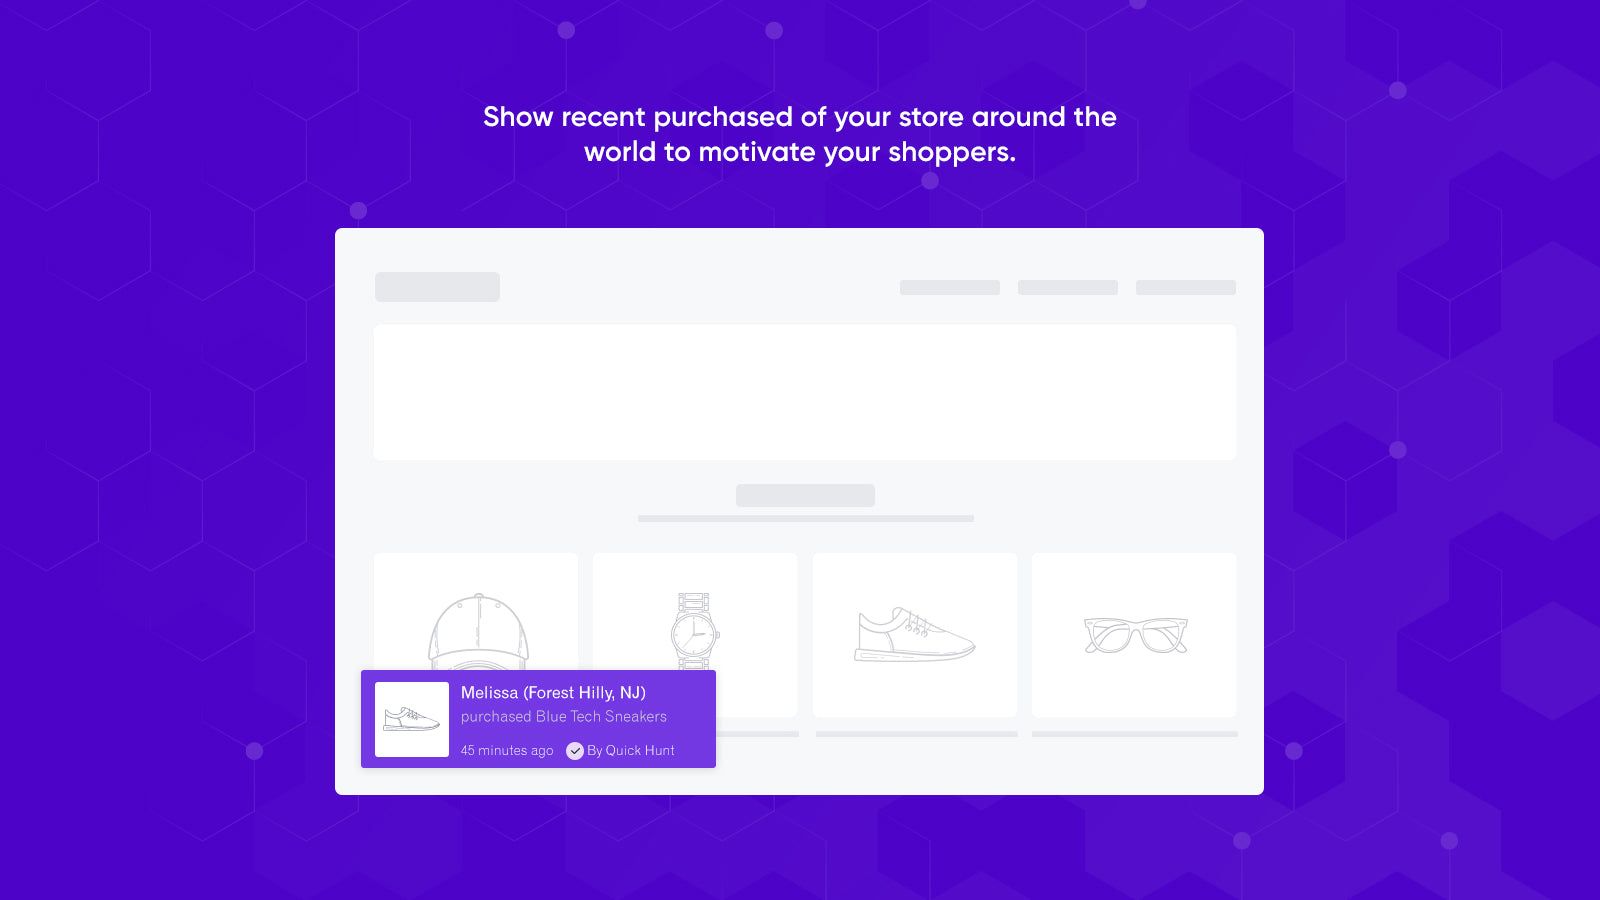 Quickview makes the checkout process easy by showing all details